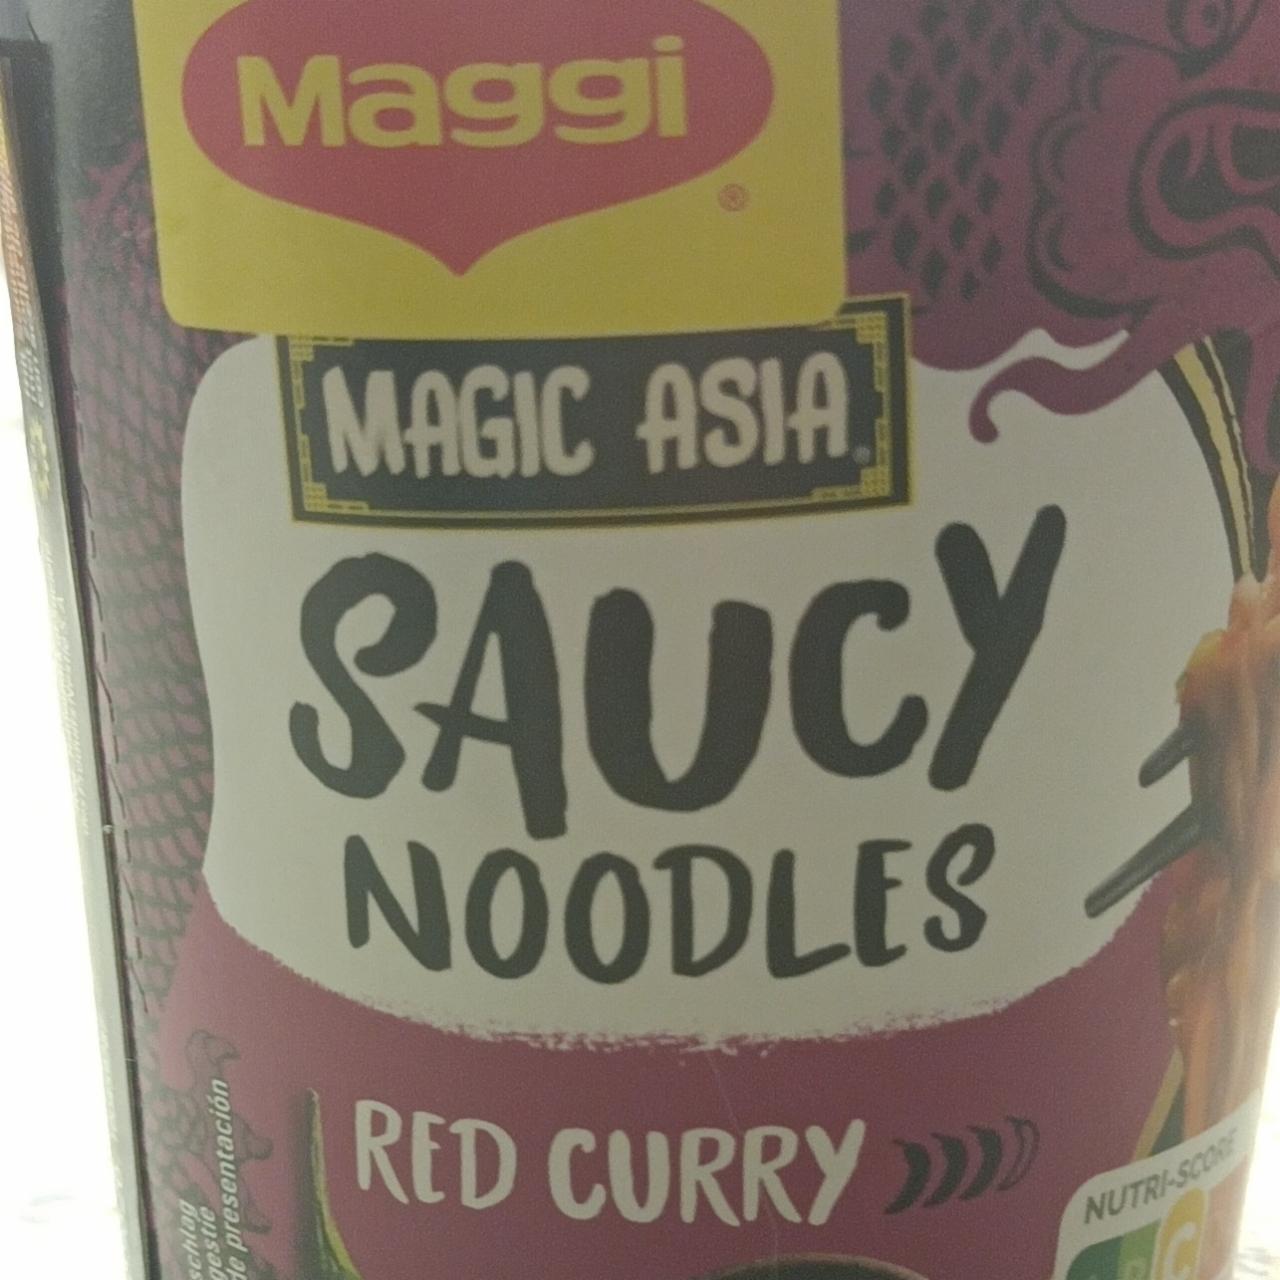 Fotografie - Magic Asia Saucy Noodles Red Curry Maggi